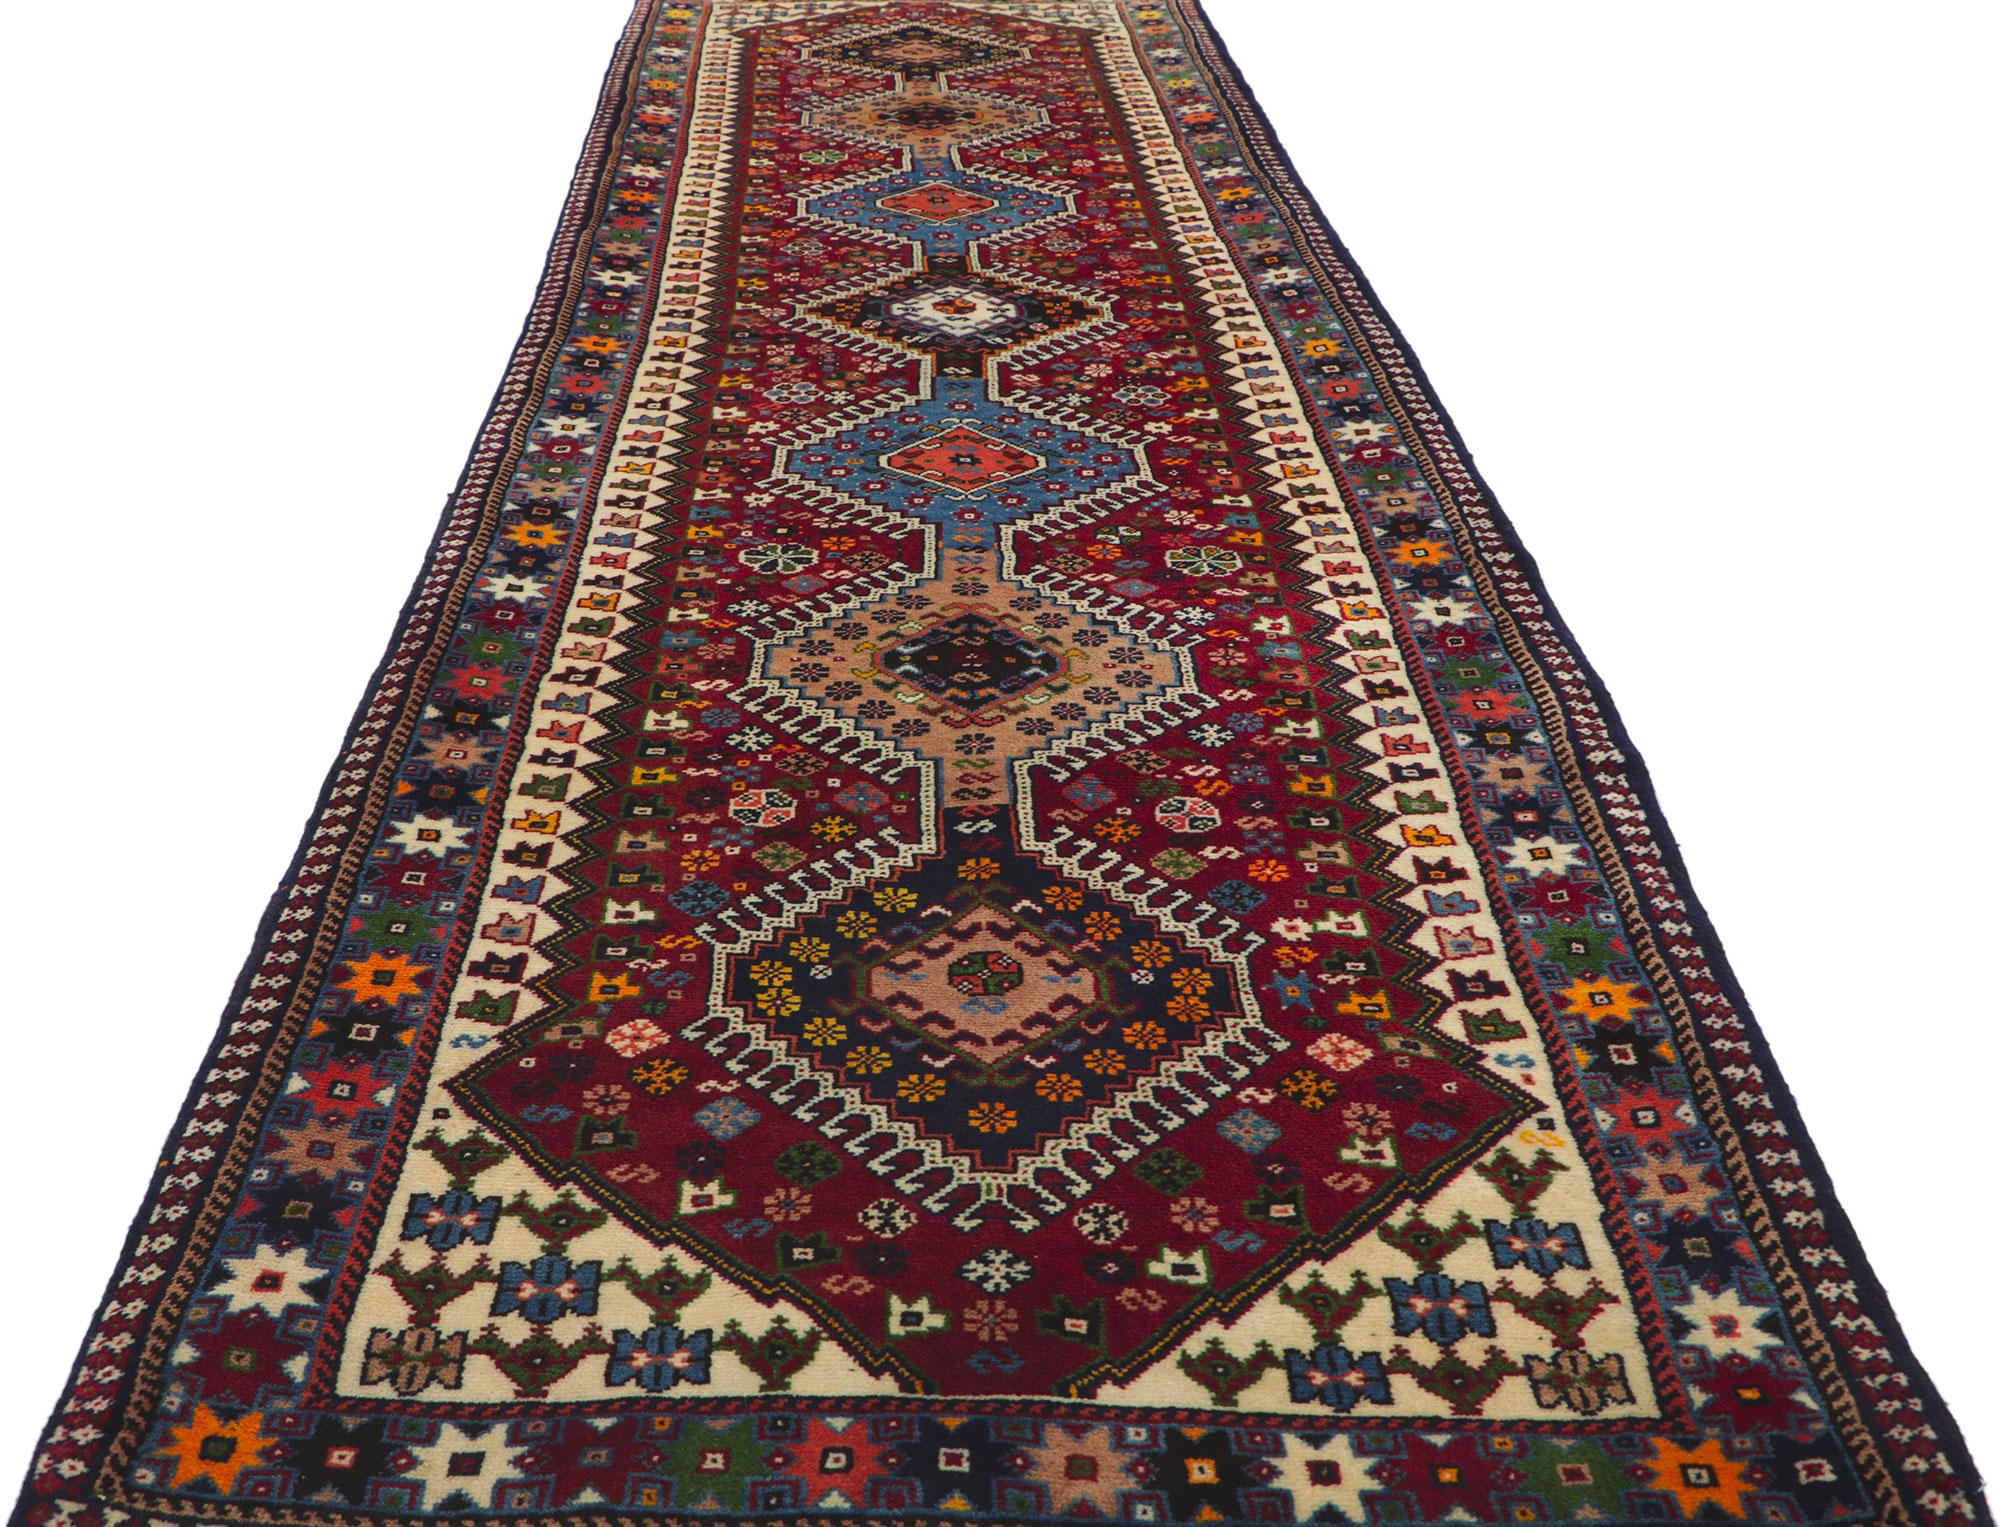 Vintage Persian Shiraz Rug, Tribal Enchantment Meets Nomadic Charm In Good Condition For Sale In Dallas, TX